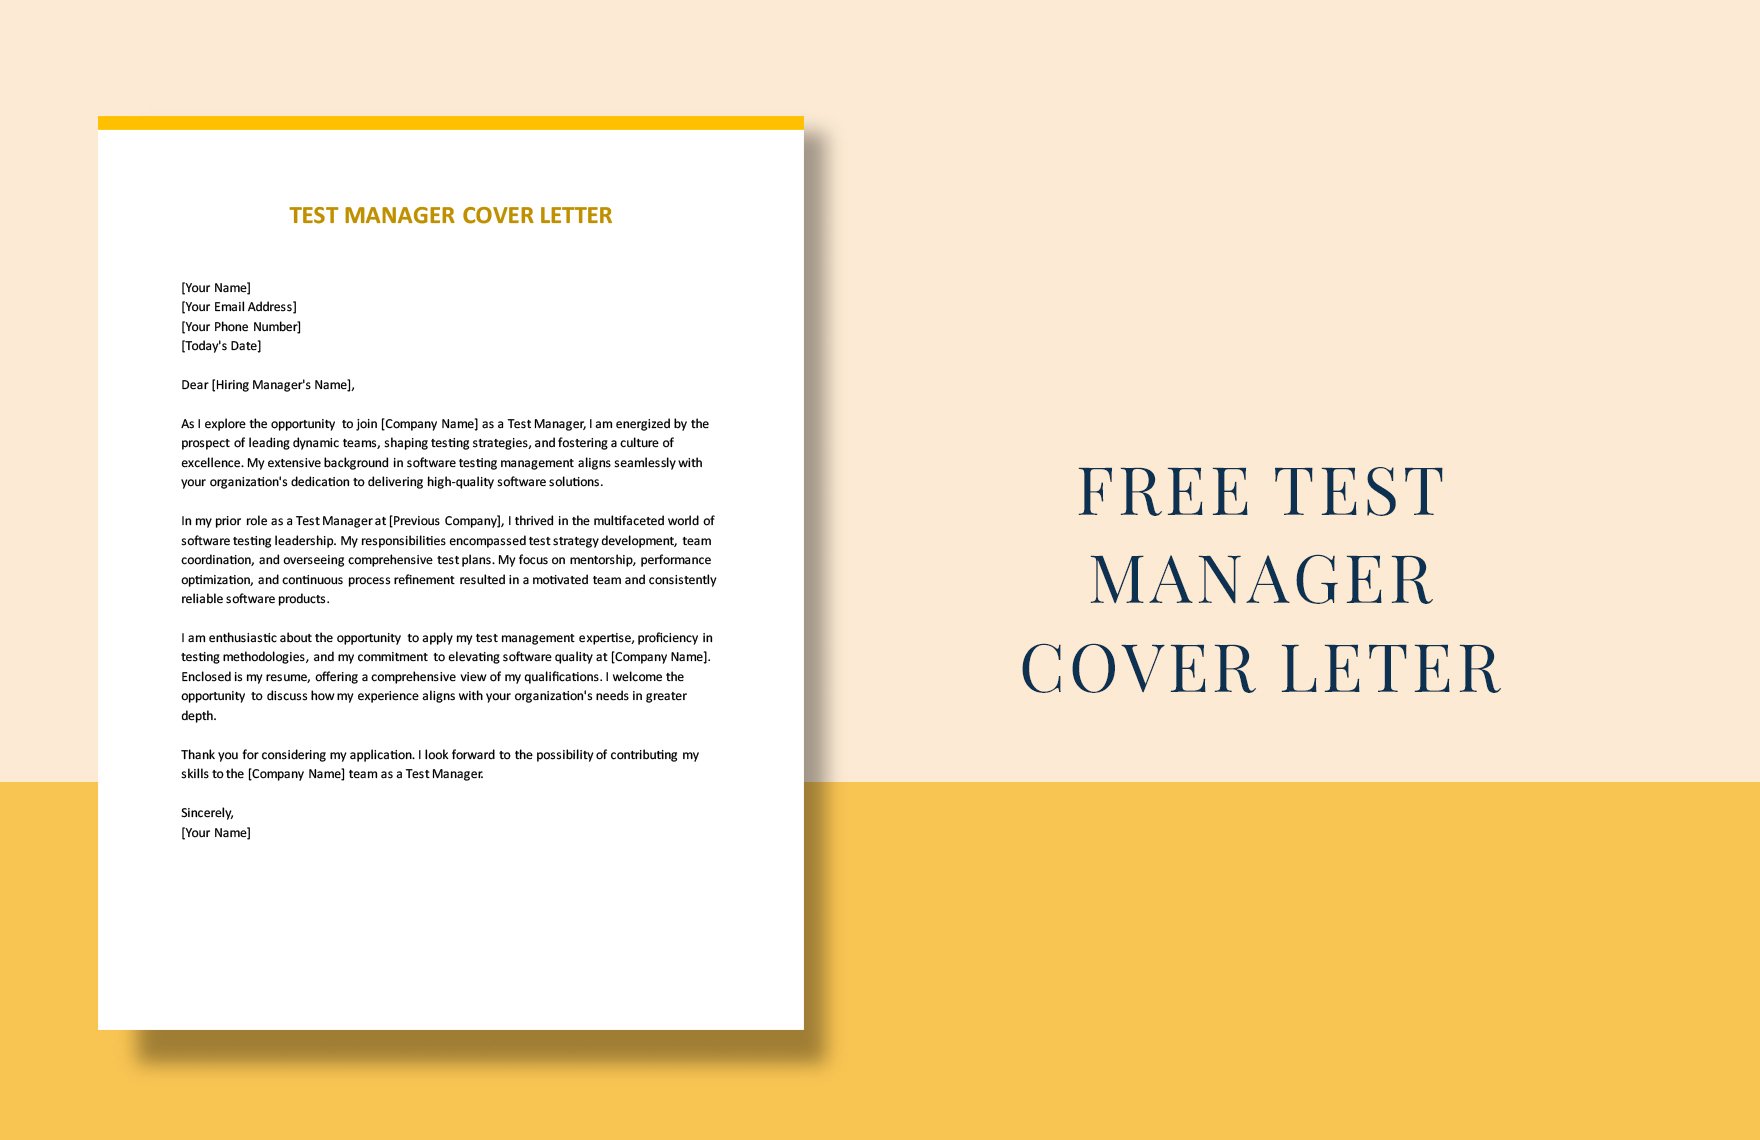 Test Manager Cover Letter